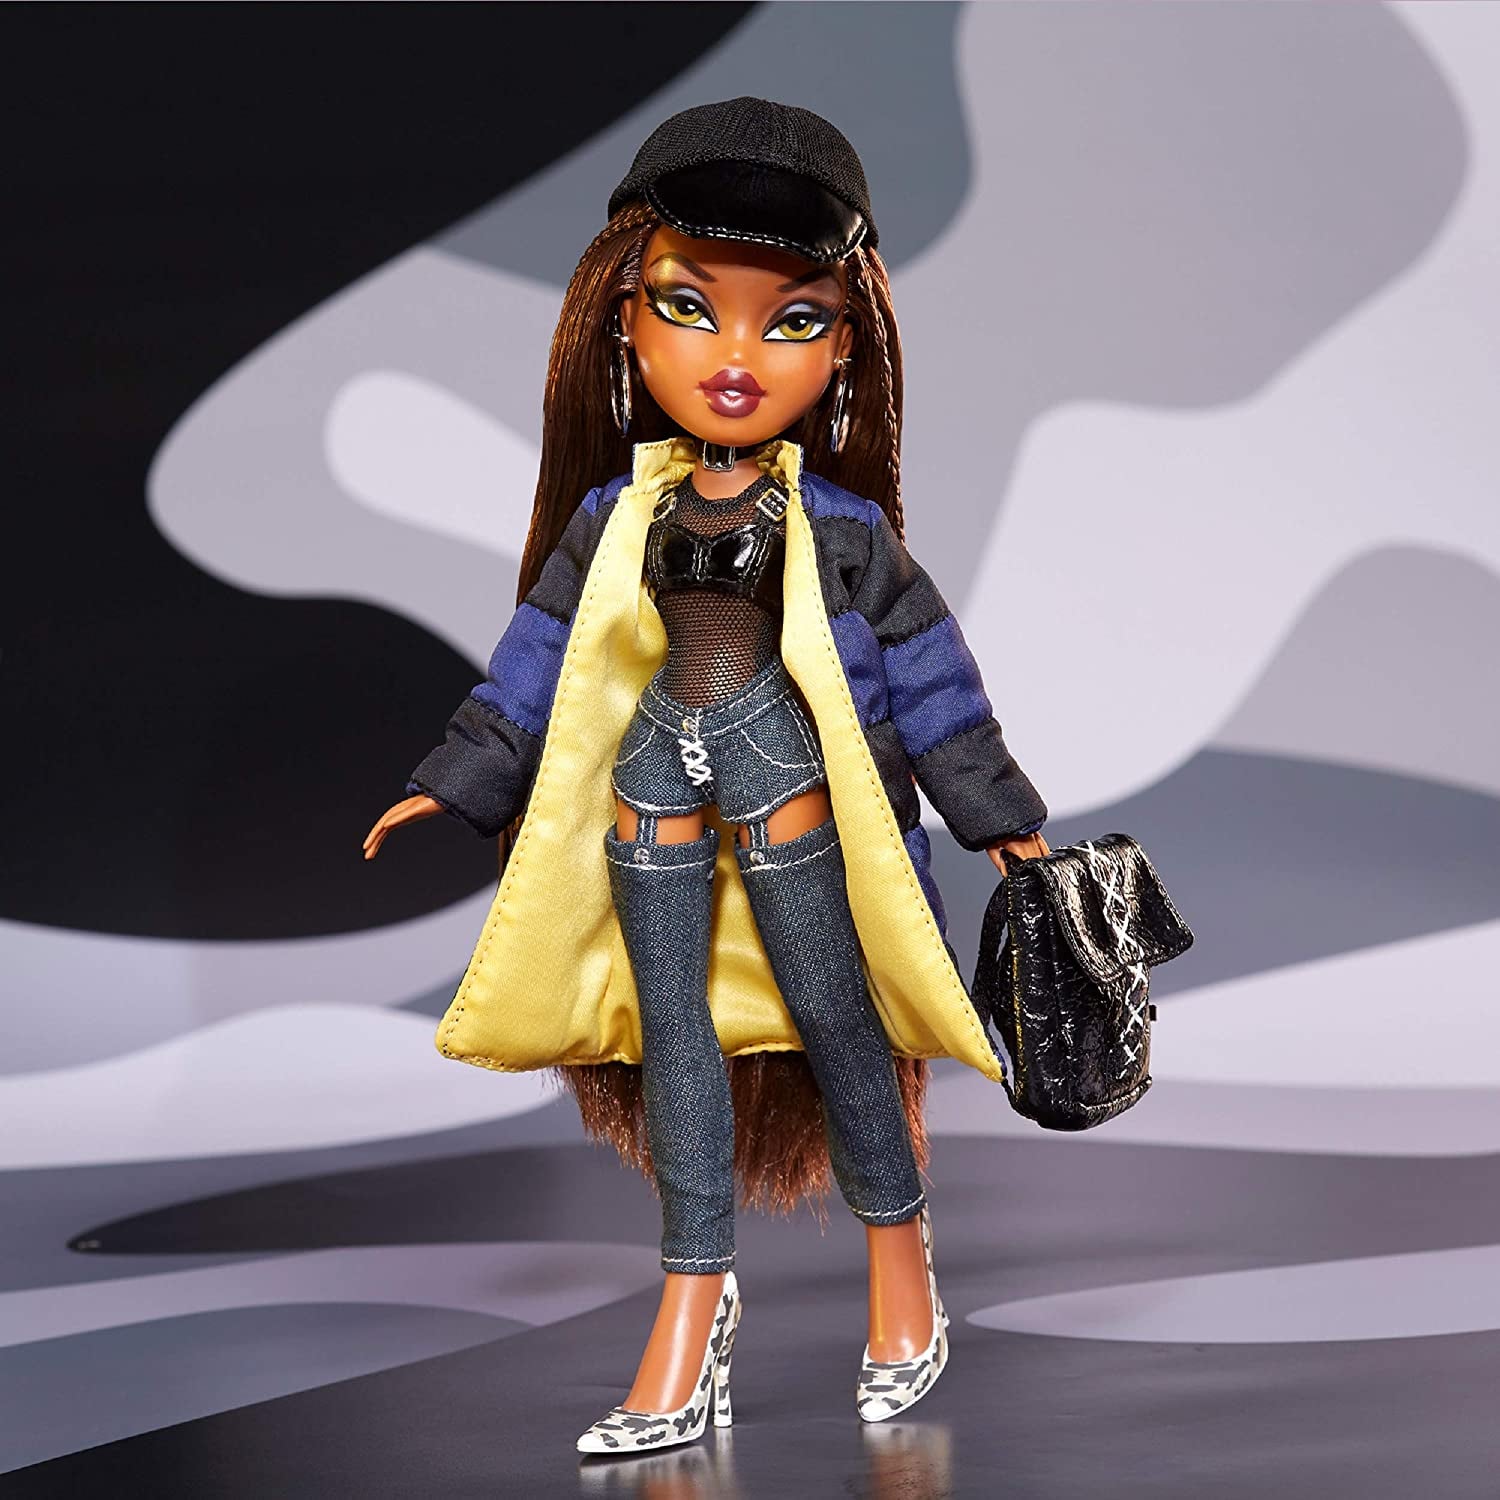 Bratz Doll  33 Toys You Definitely Had If You Grew Up in the